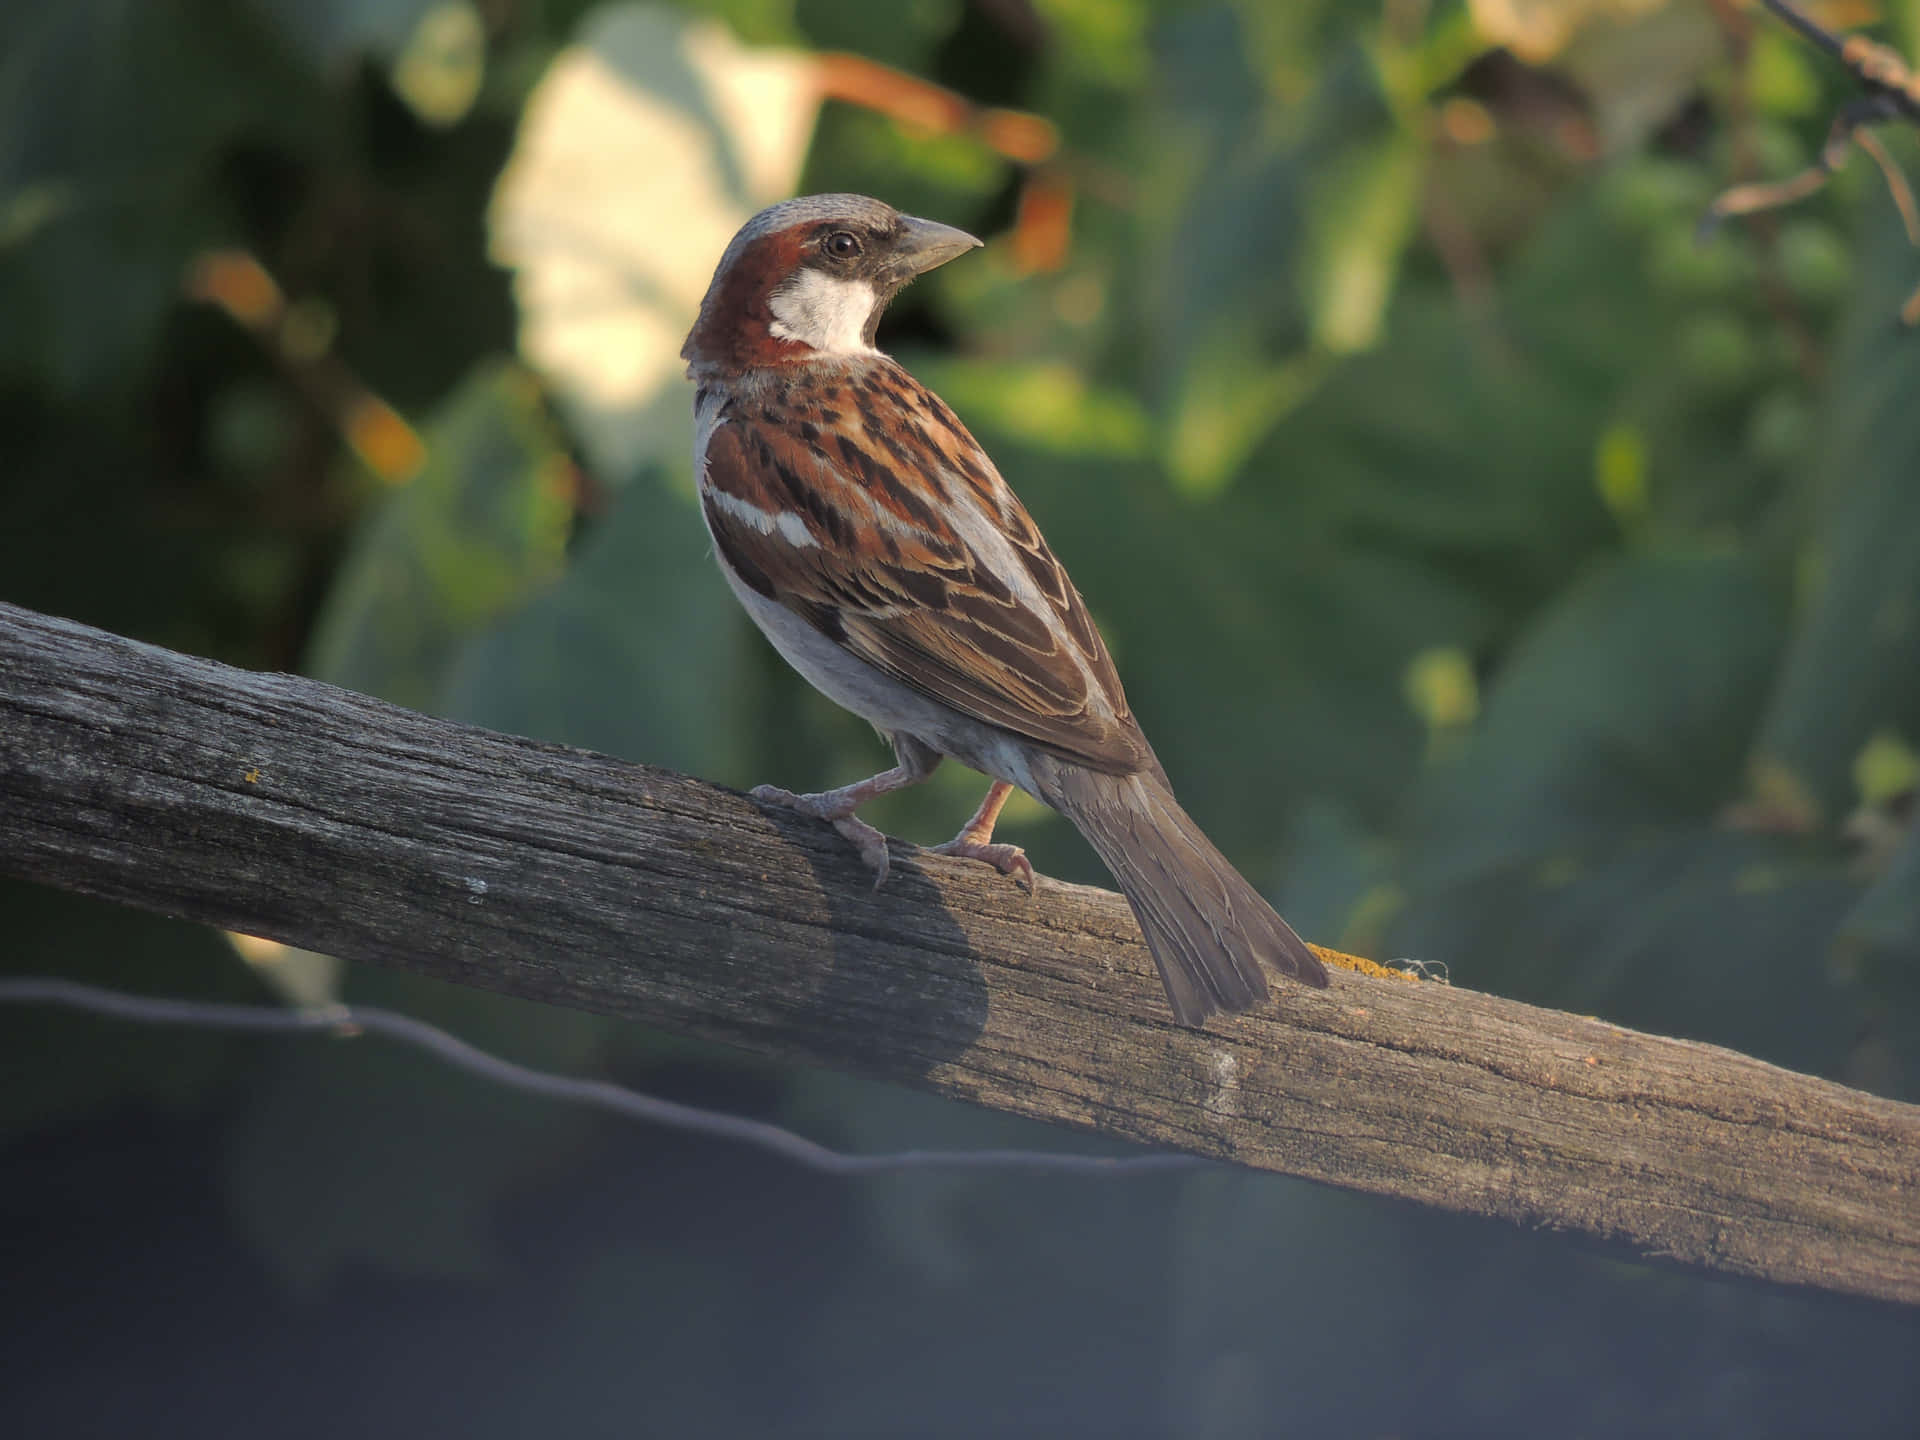 A small brown sparrow perching happily on a branch